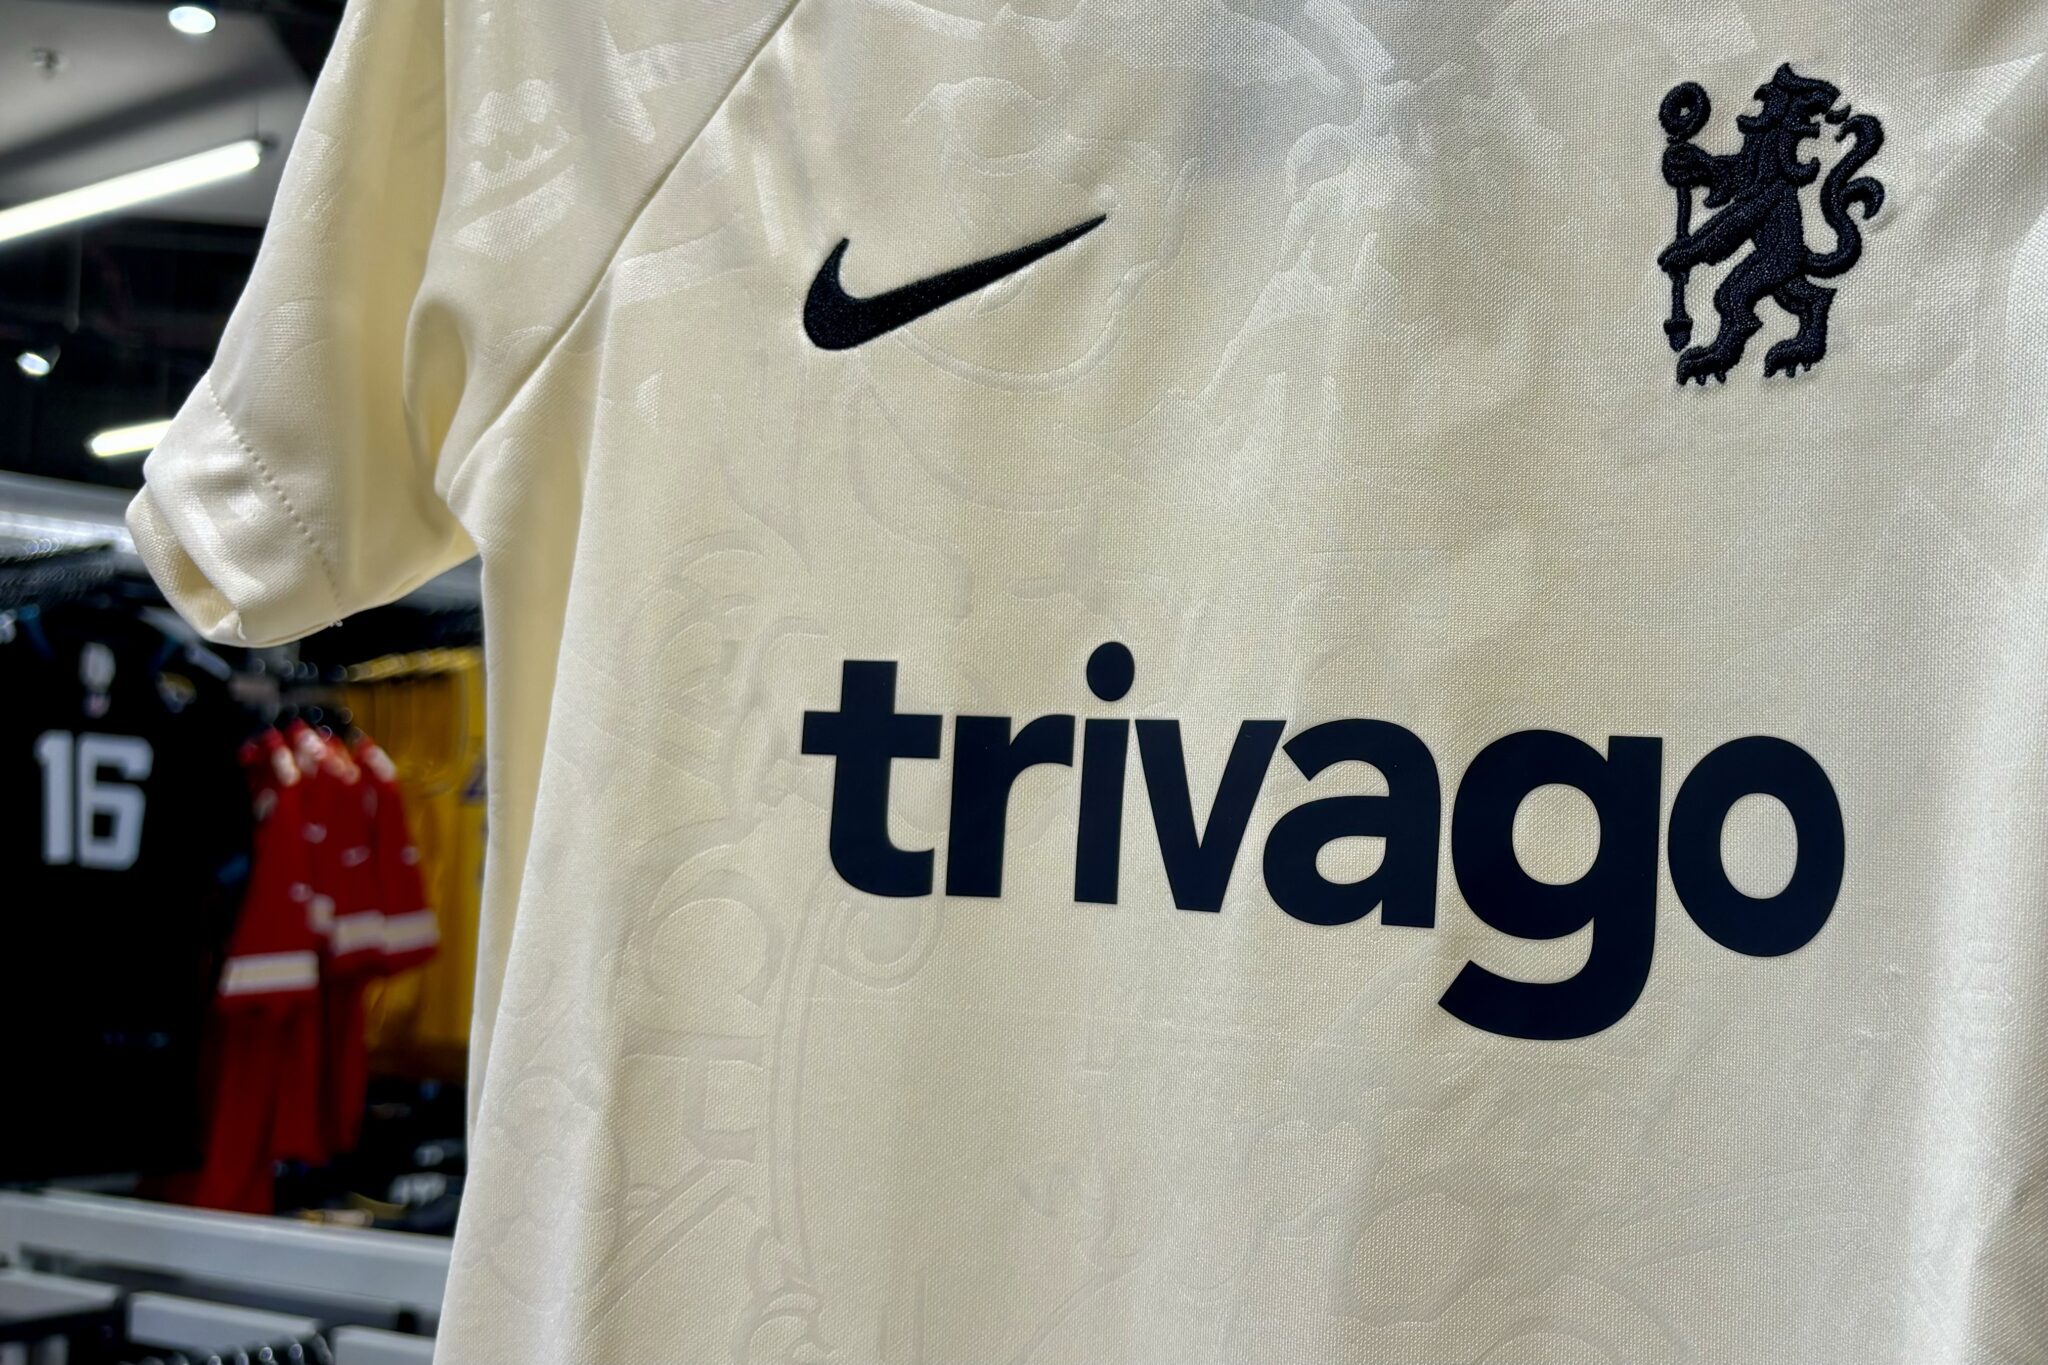 Trivago’s logo on a Chelsea football jersey. 